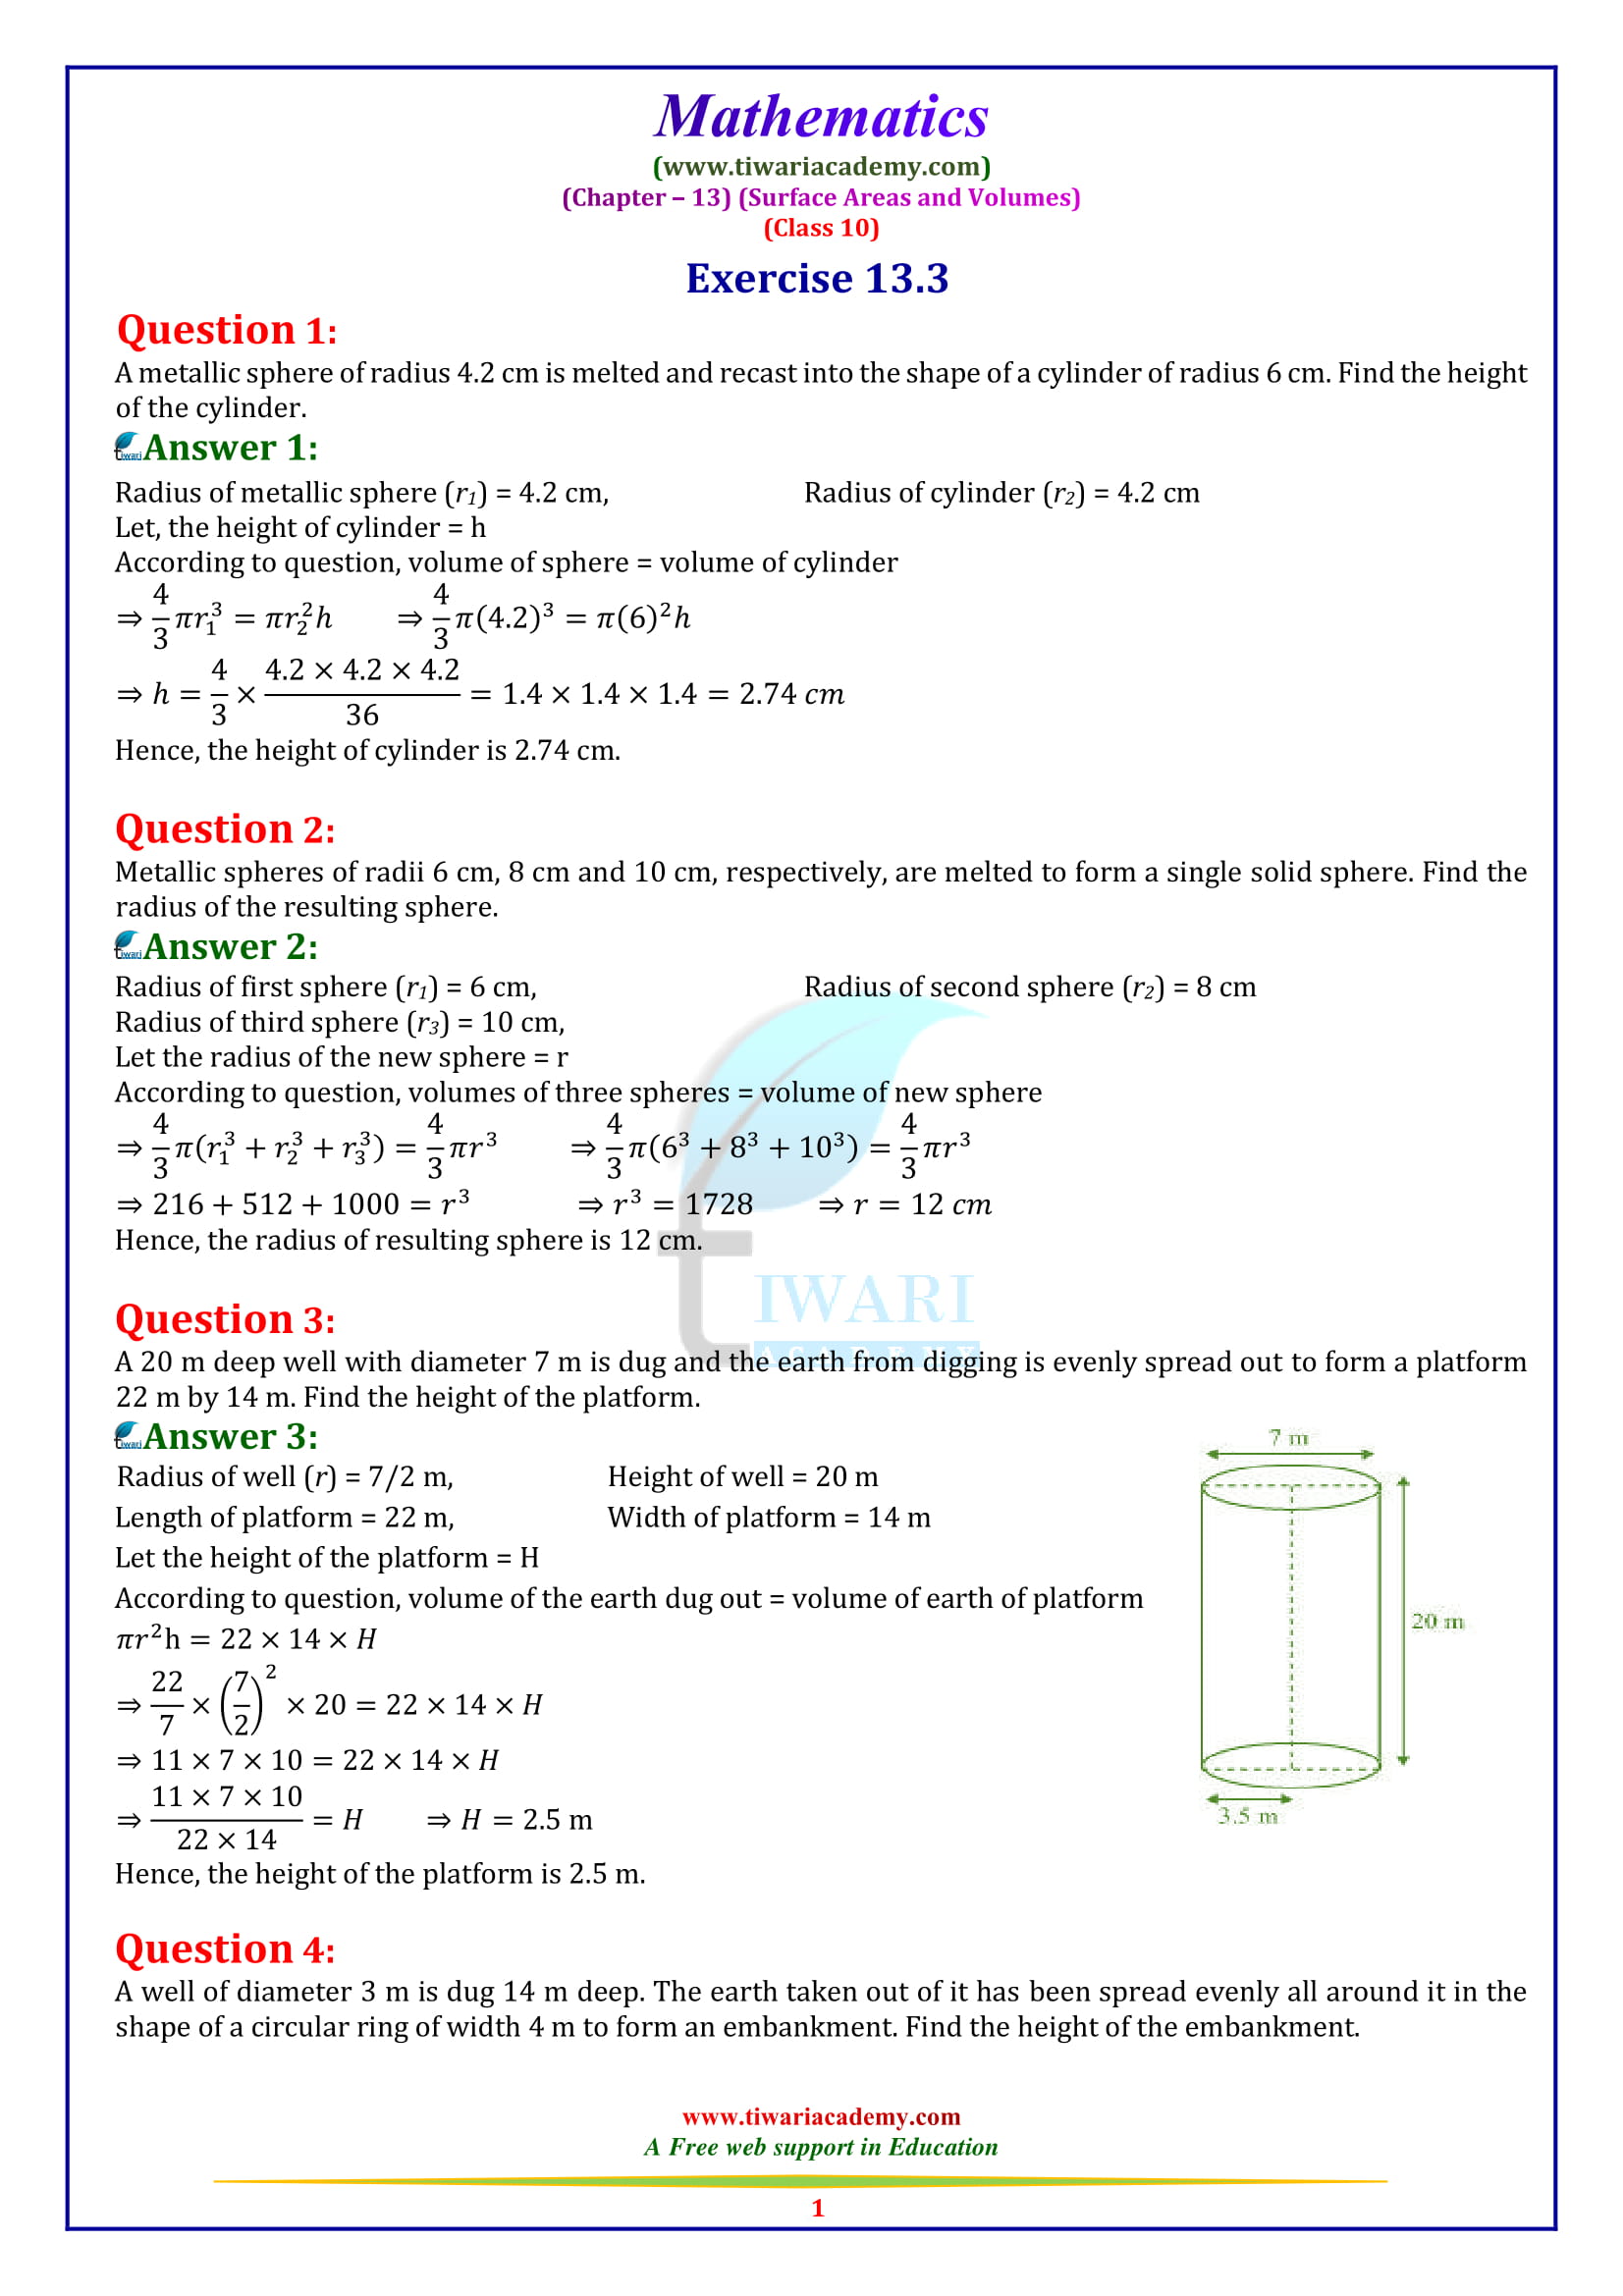 NCERT Solutions for Class 10 Maths Chapter 13 Exercise 13.3 in PDF